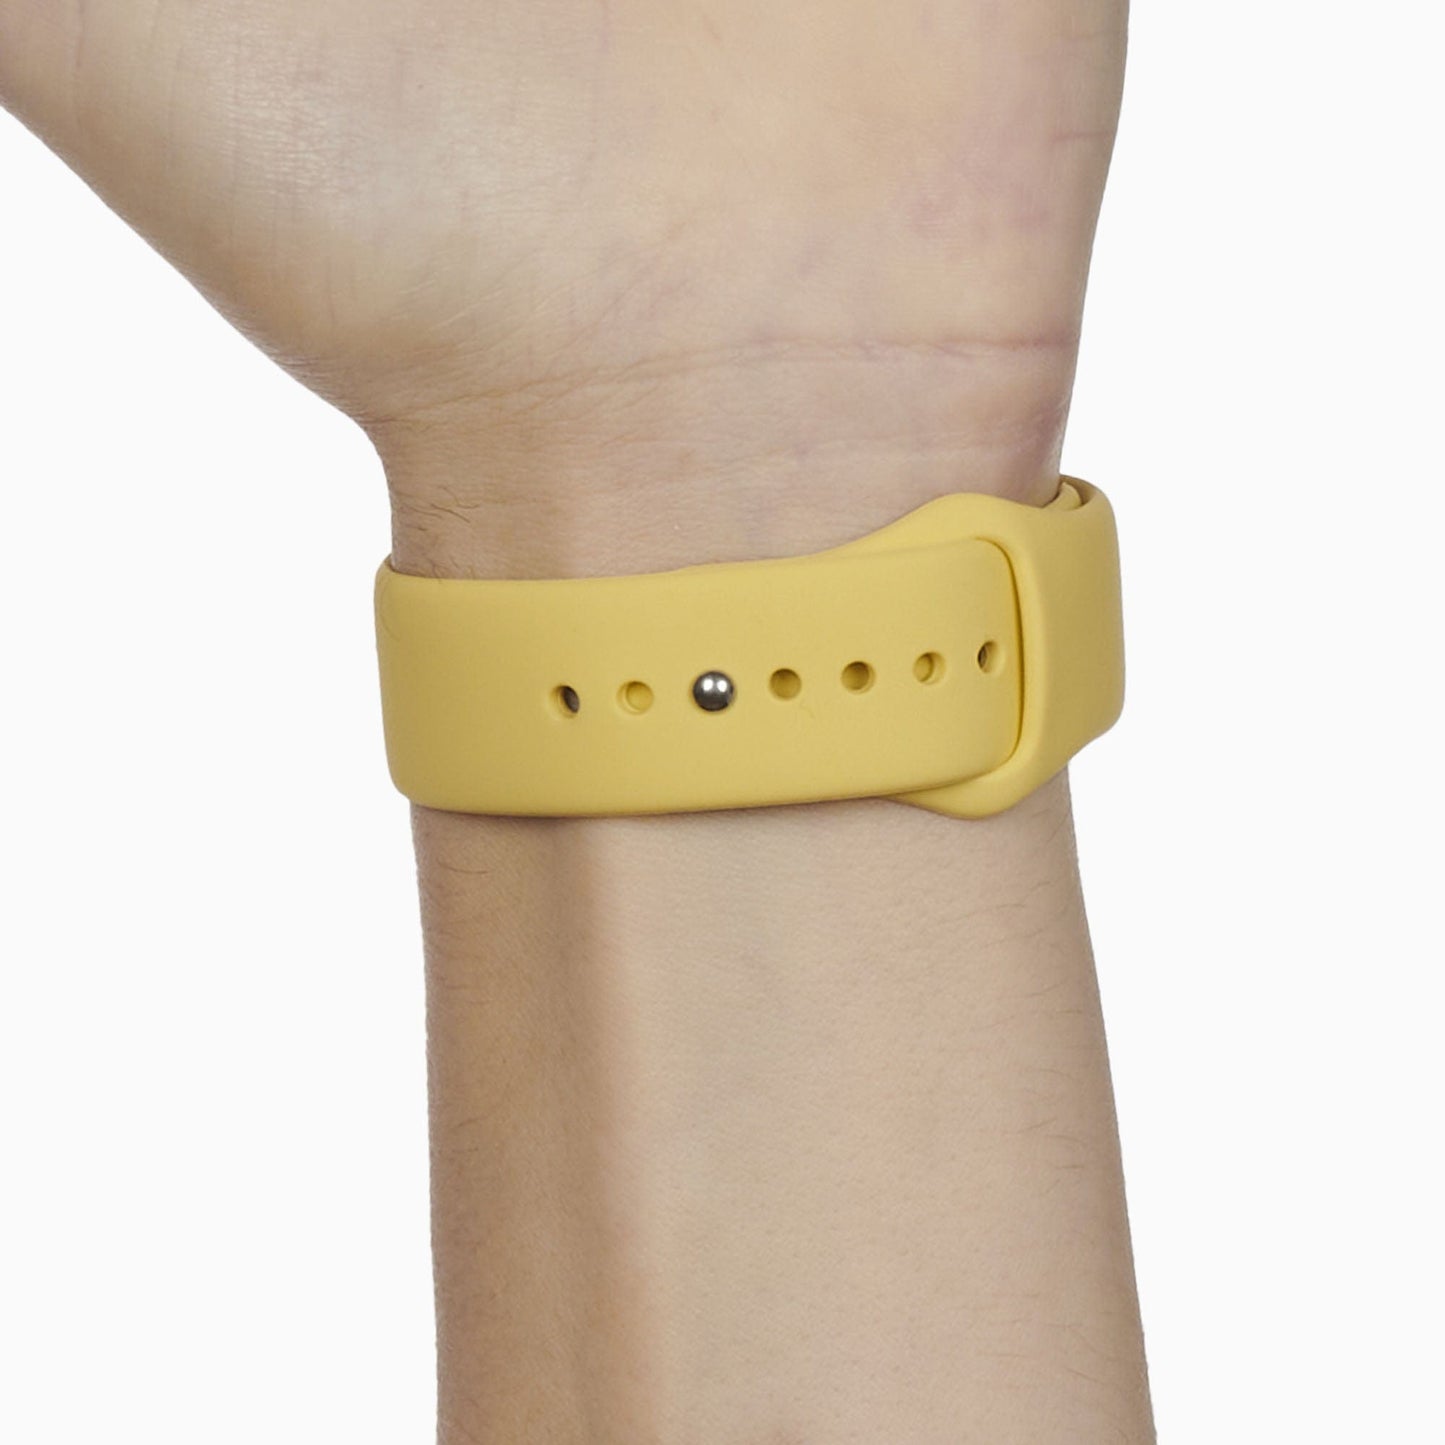 Mellow Yellow Sport Band for Apple Watch